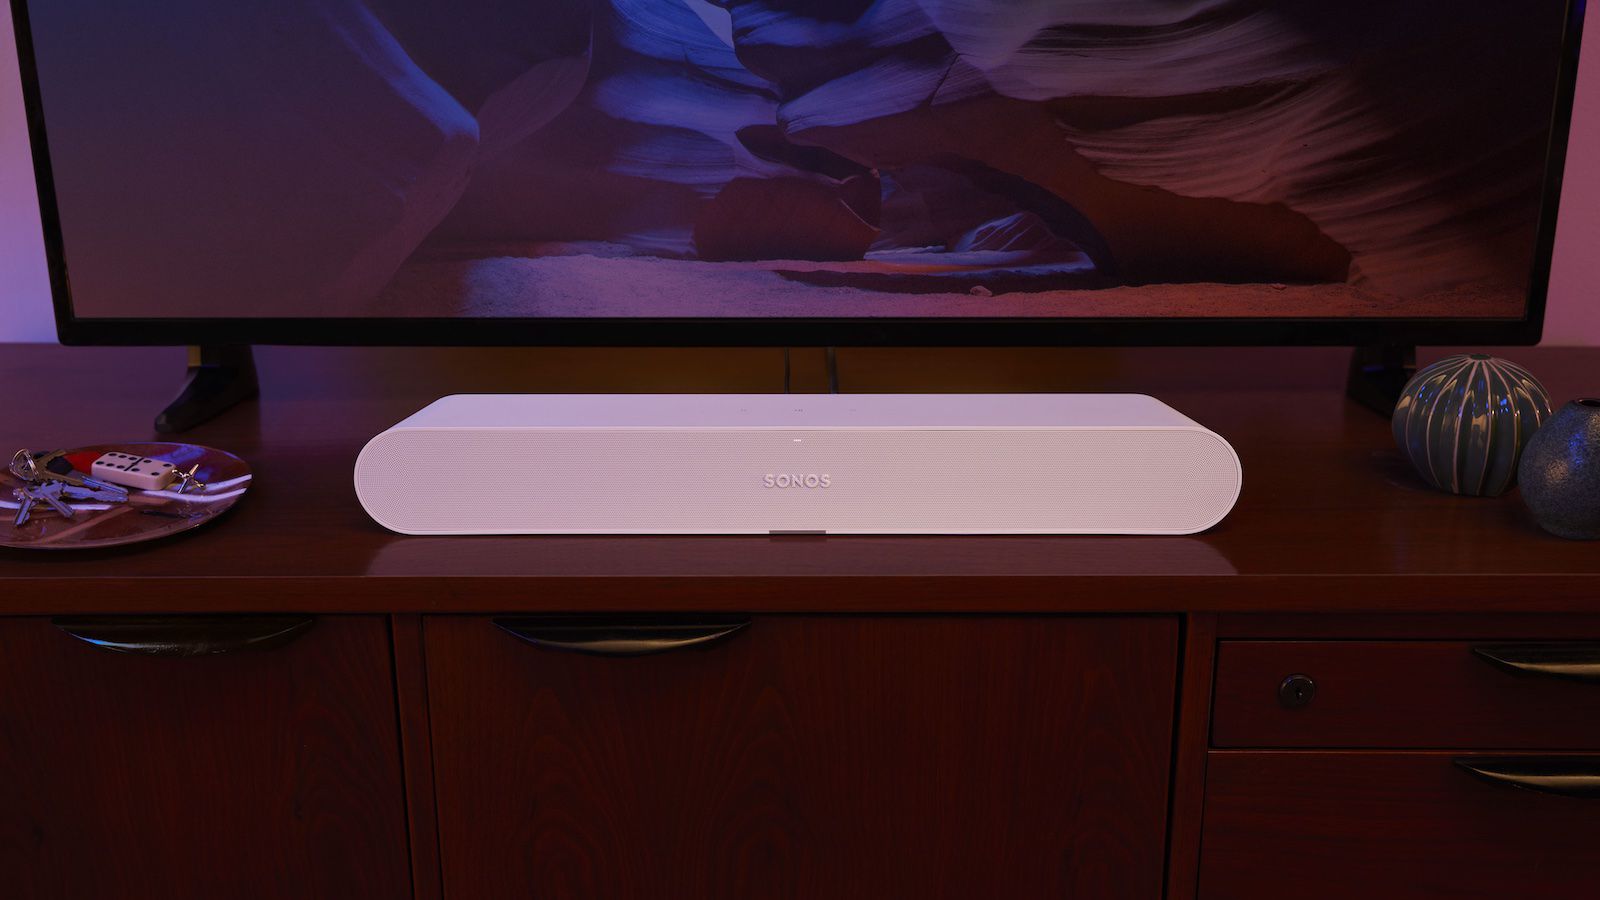 Sonos Announces Lower-Priced Soundbar With AirPlay 2 Support, 'Hey Sonos' Voice ..